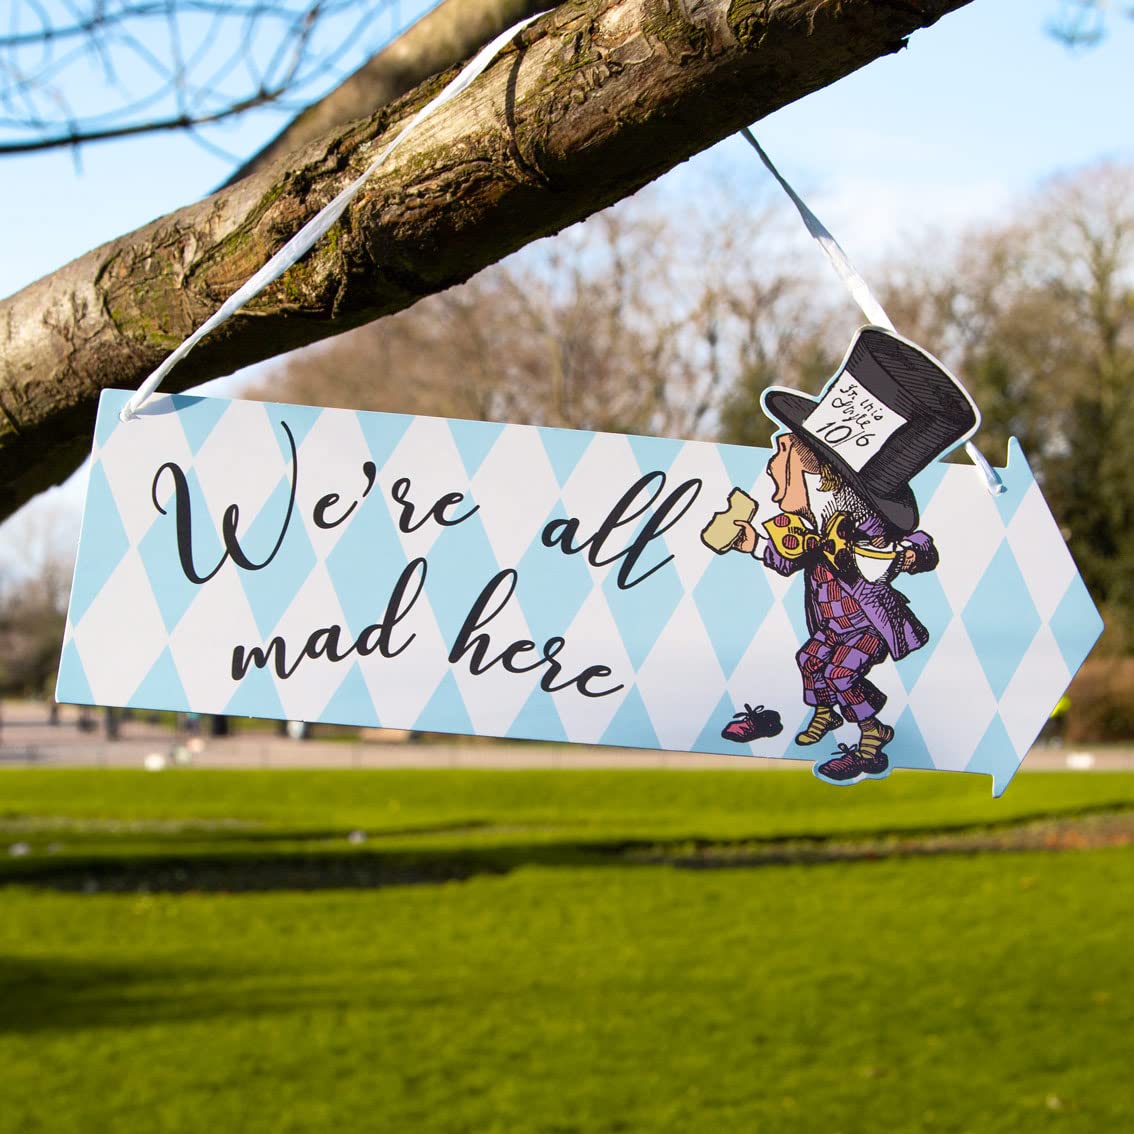 Talking Tables Pack of 12 Alice in Wonderland Party Decorations | Arrow Signs for Mad Hatters Tea Party with Quotes and Characters from Book